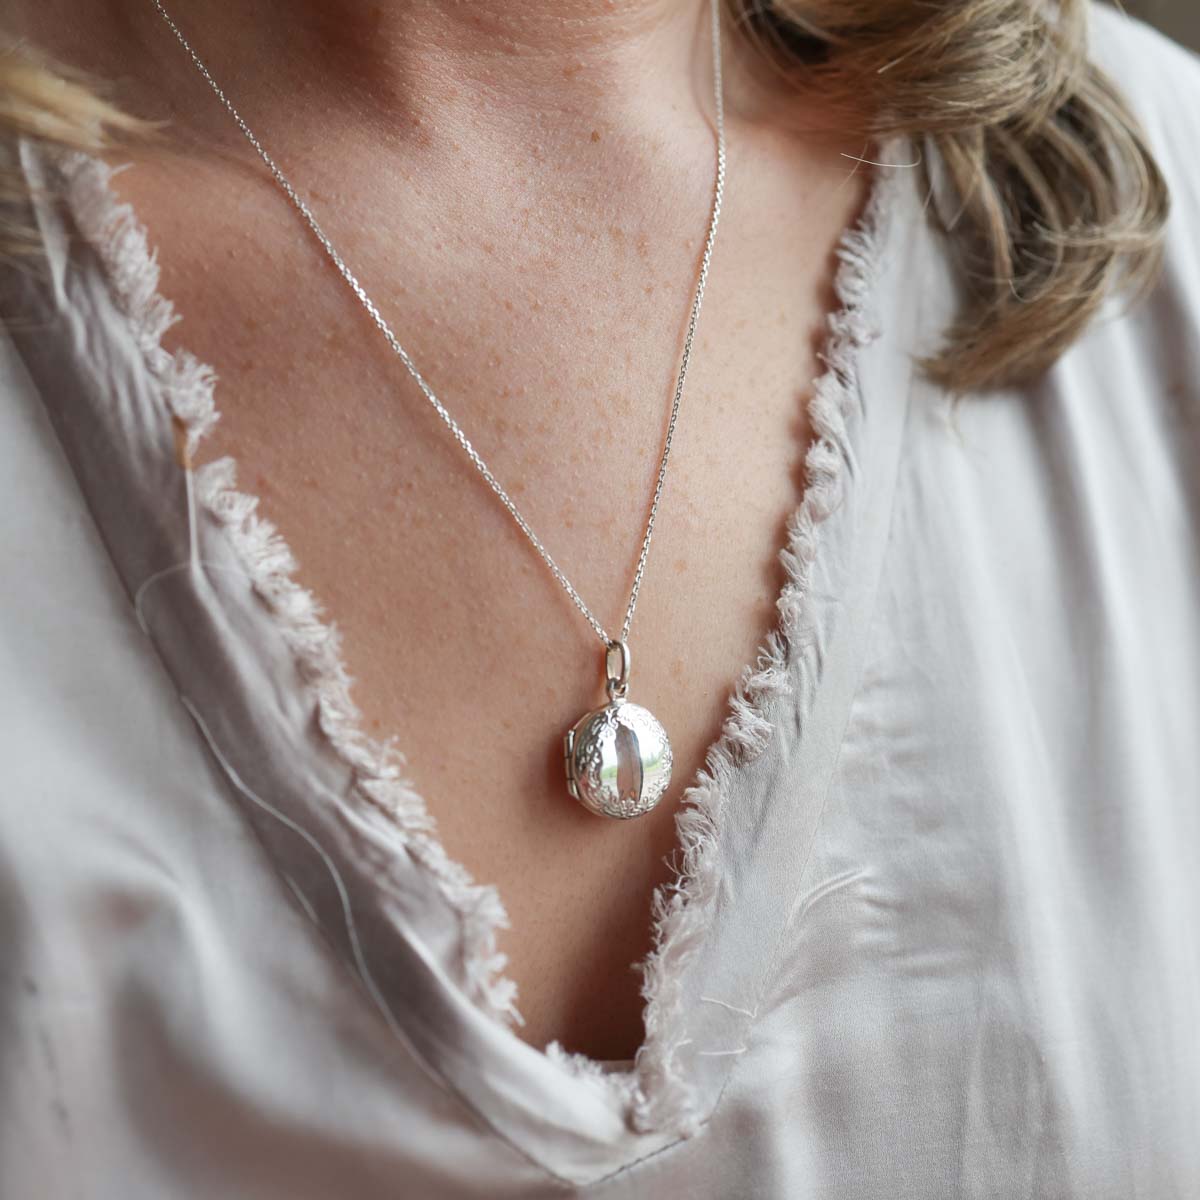 Model wearing grey top with round locket necklace on a chain